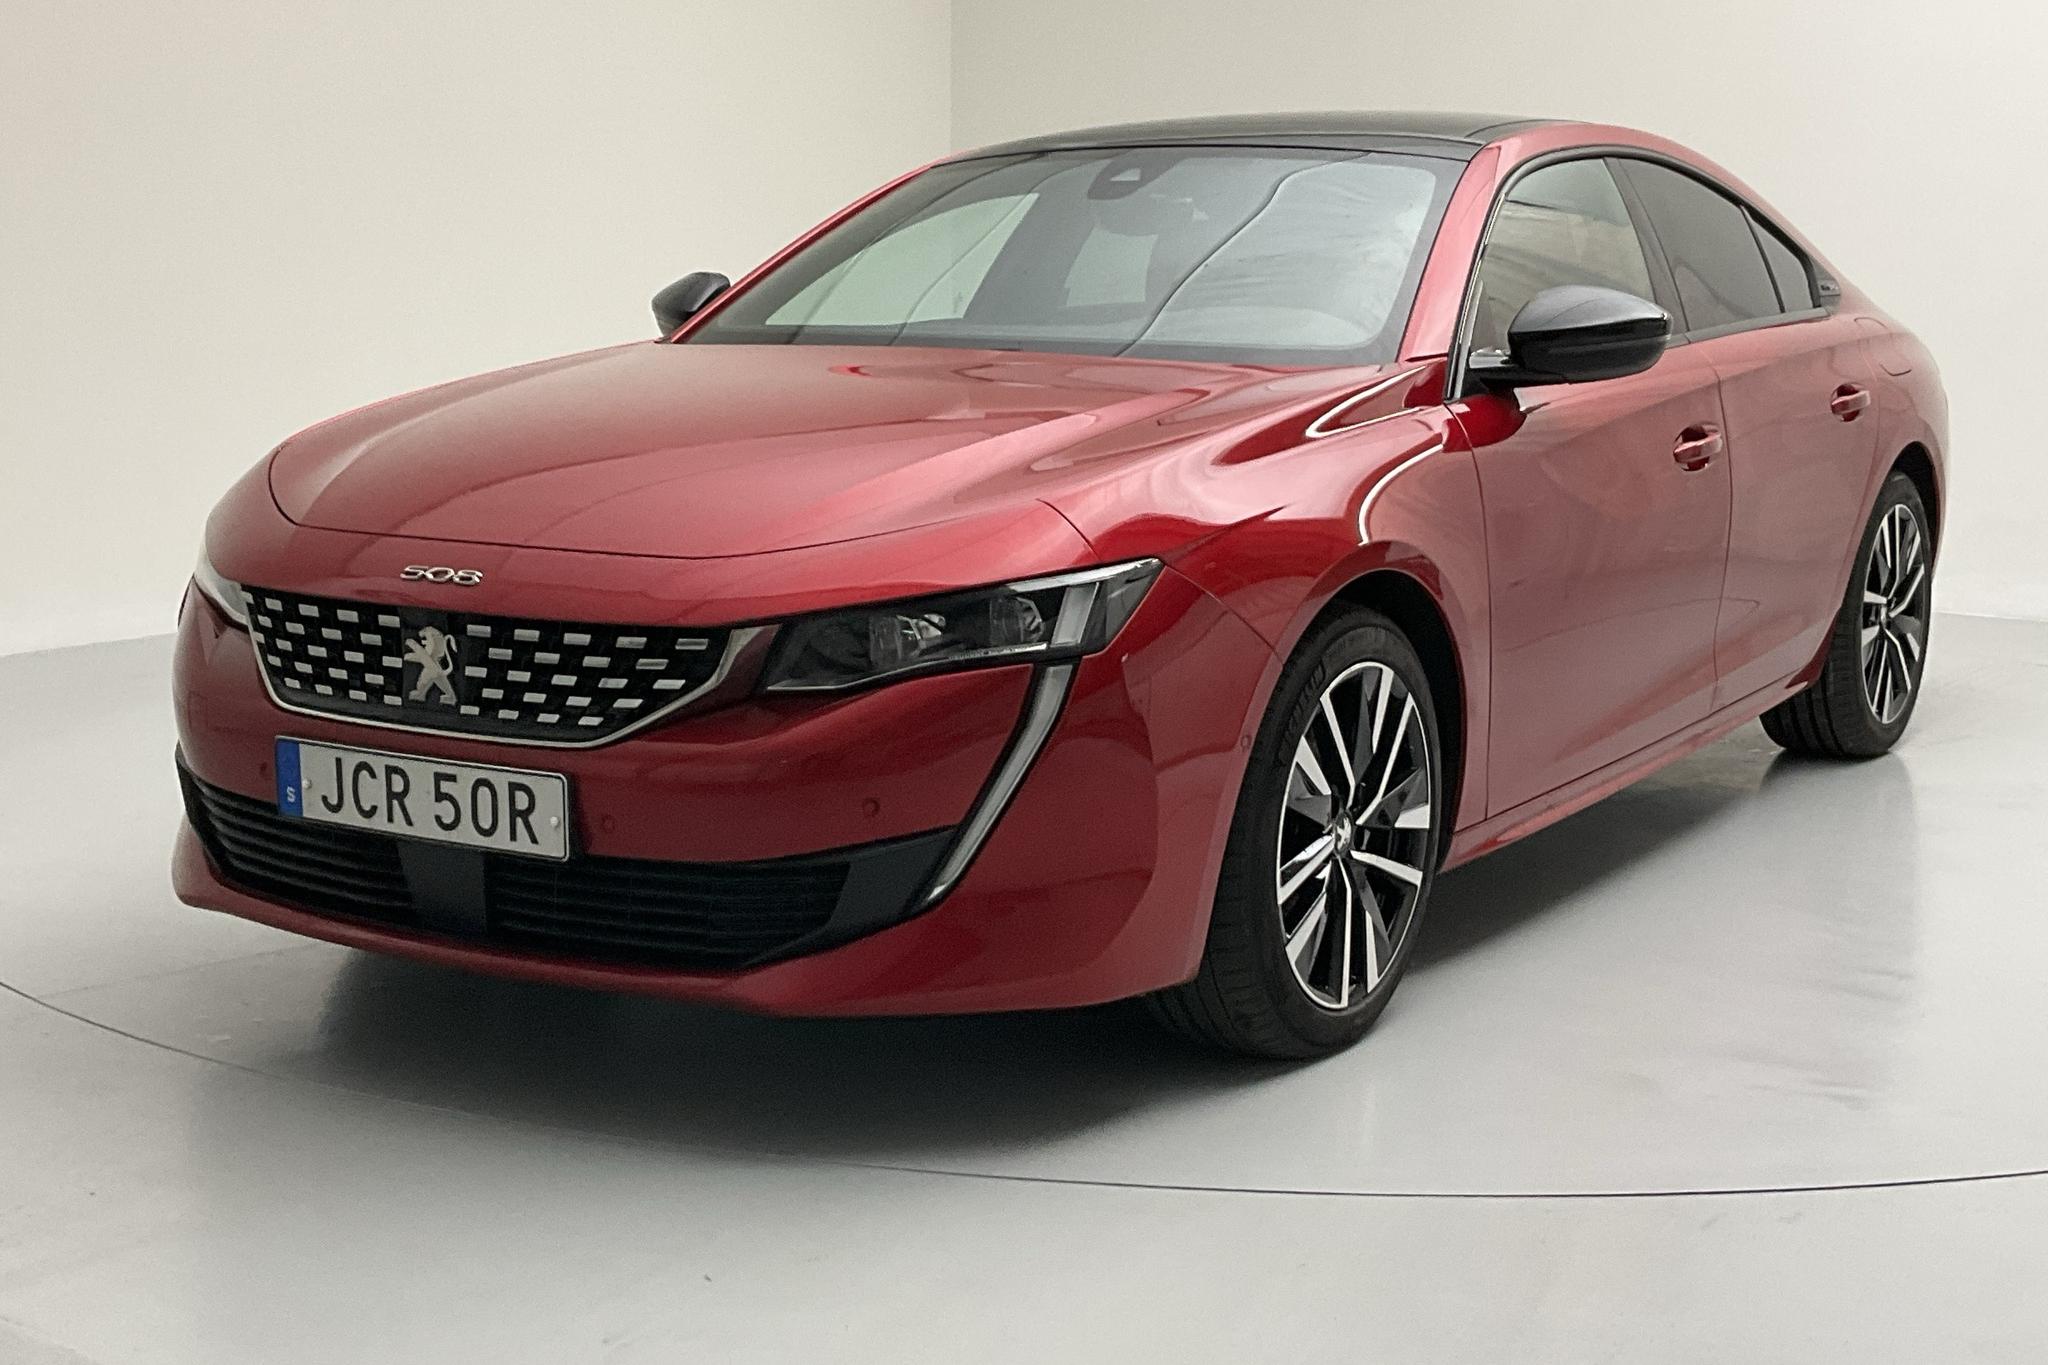 Peugeot 508 1.6 Hybrid 5dr (225hk) - 53 570 km - Automatic - red - 2020